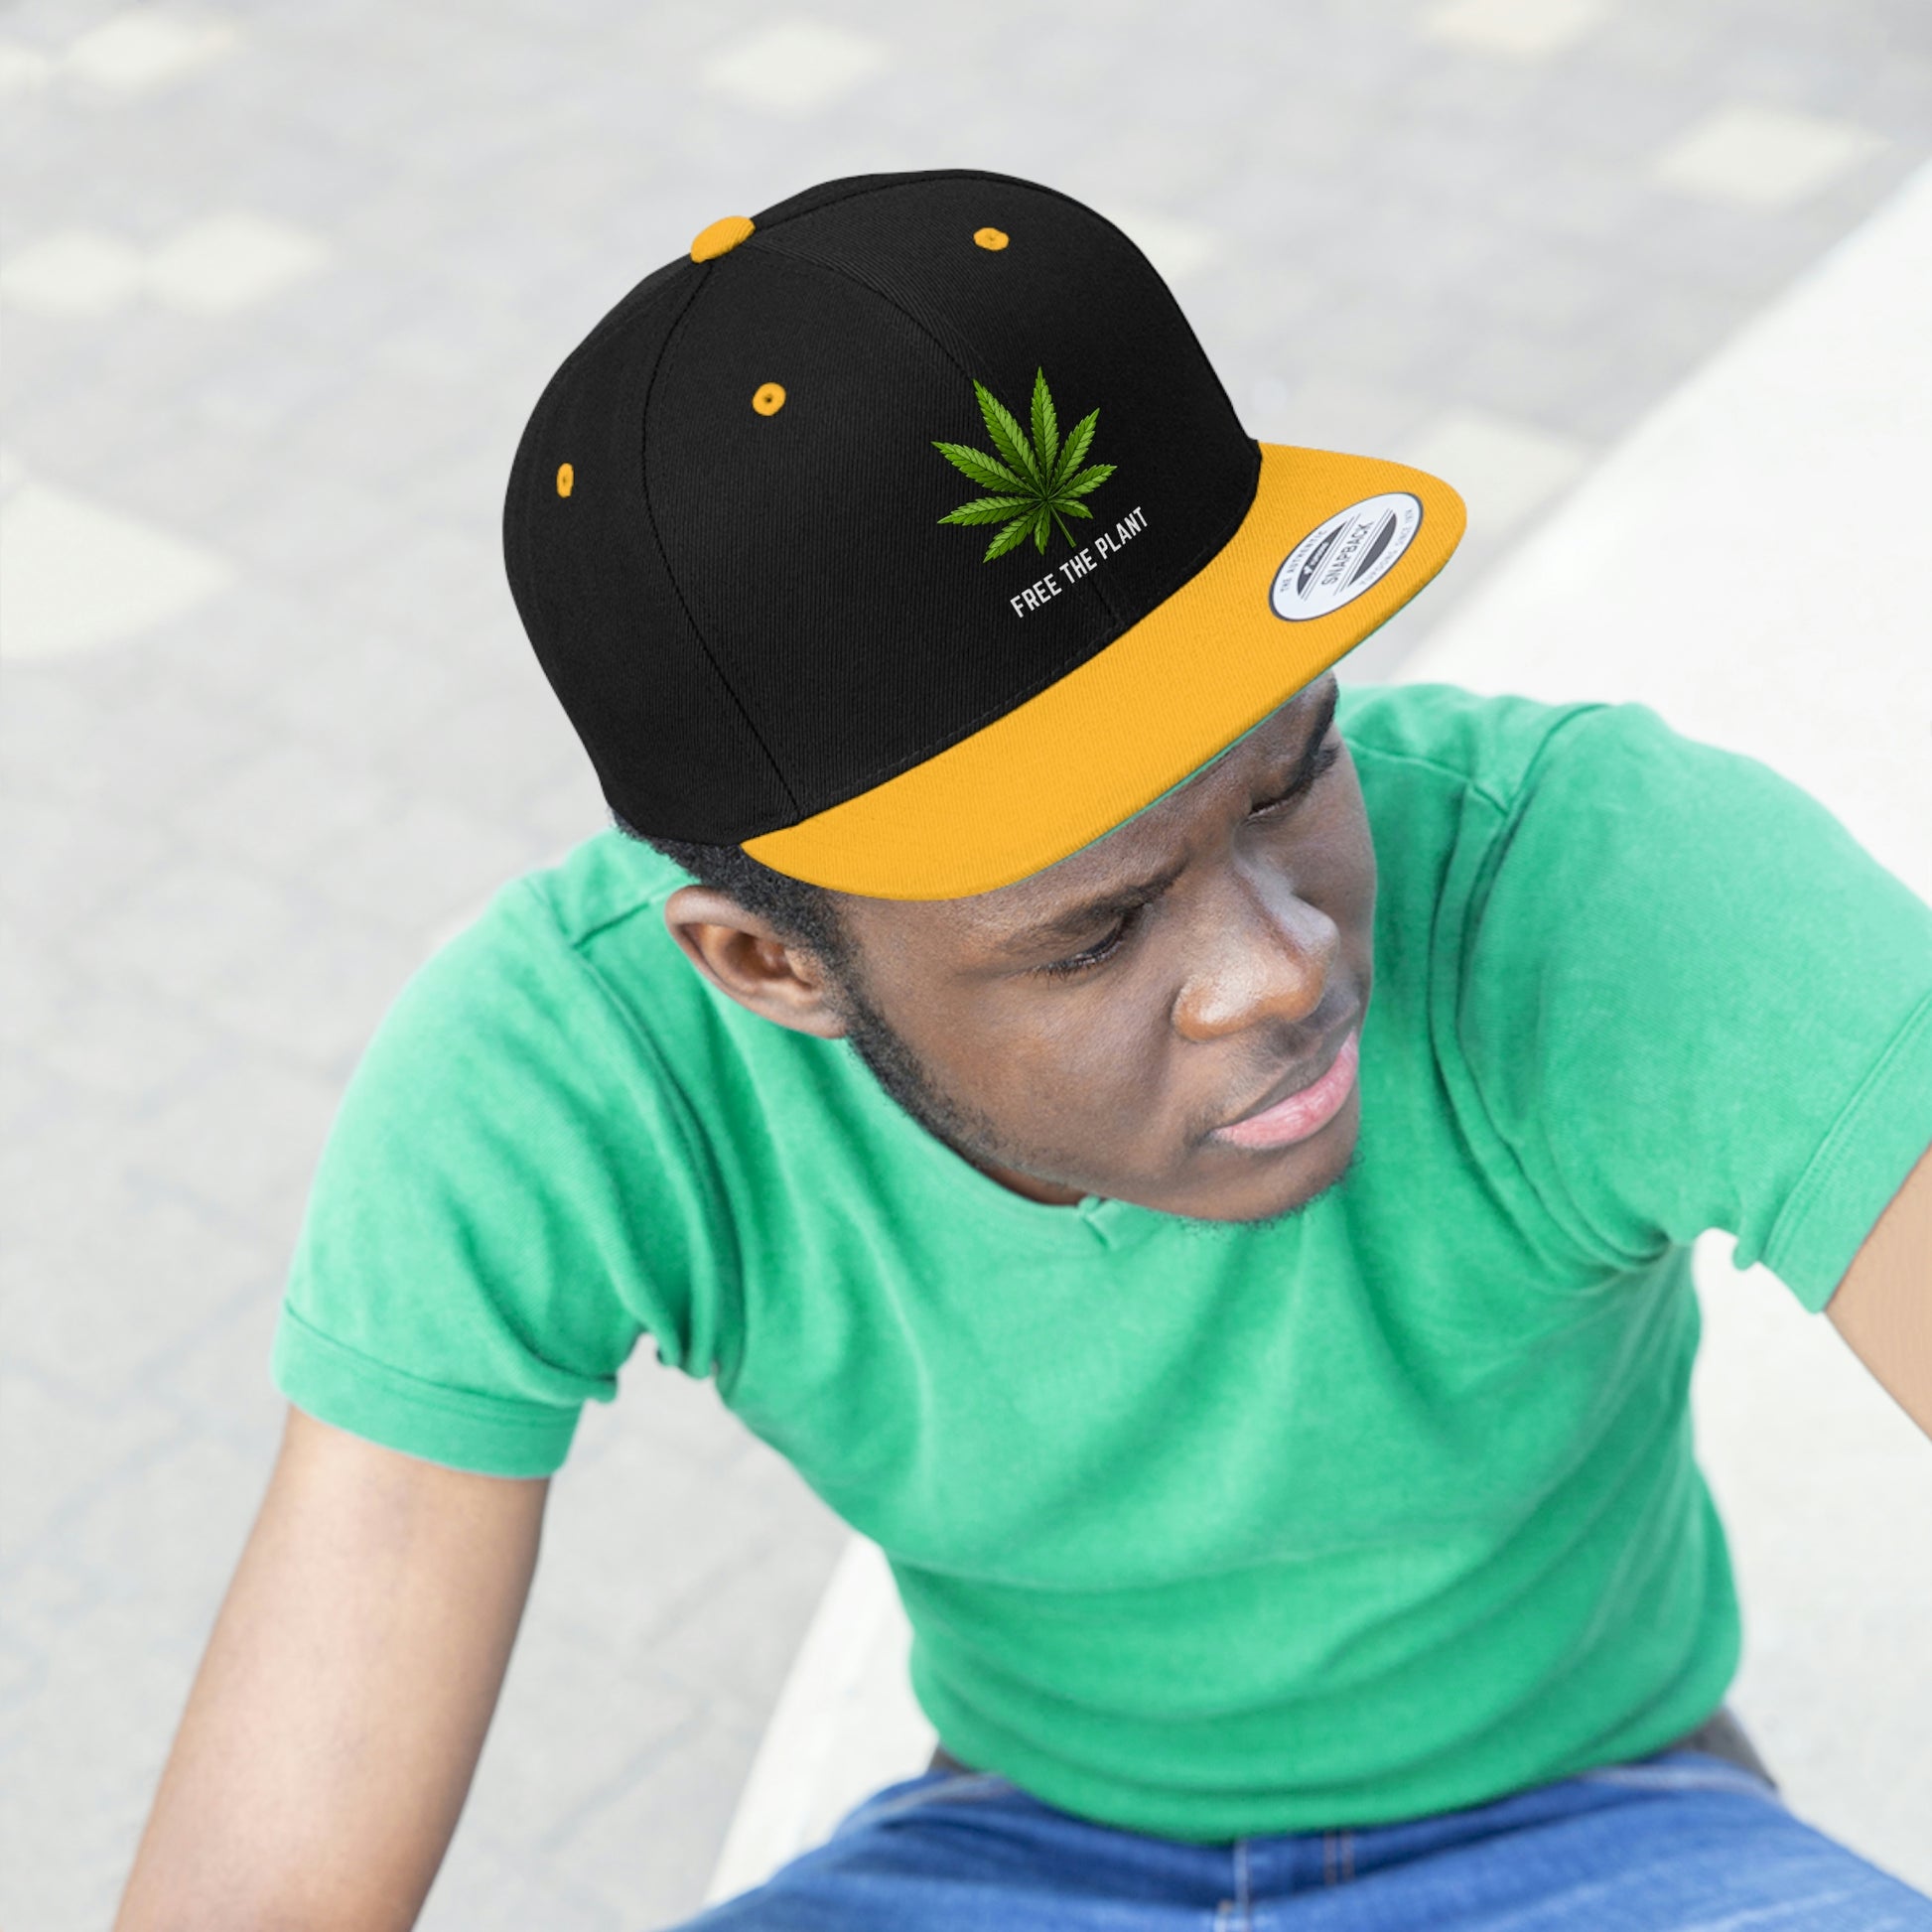 A young man looks awesome with the gold and black Free The Plant Marijuana Snapback Hat with green cannabis leaves a green underbill and a matching green t-shirt